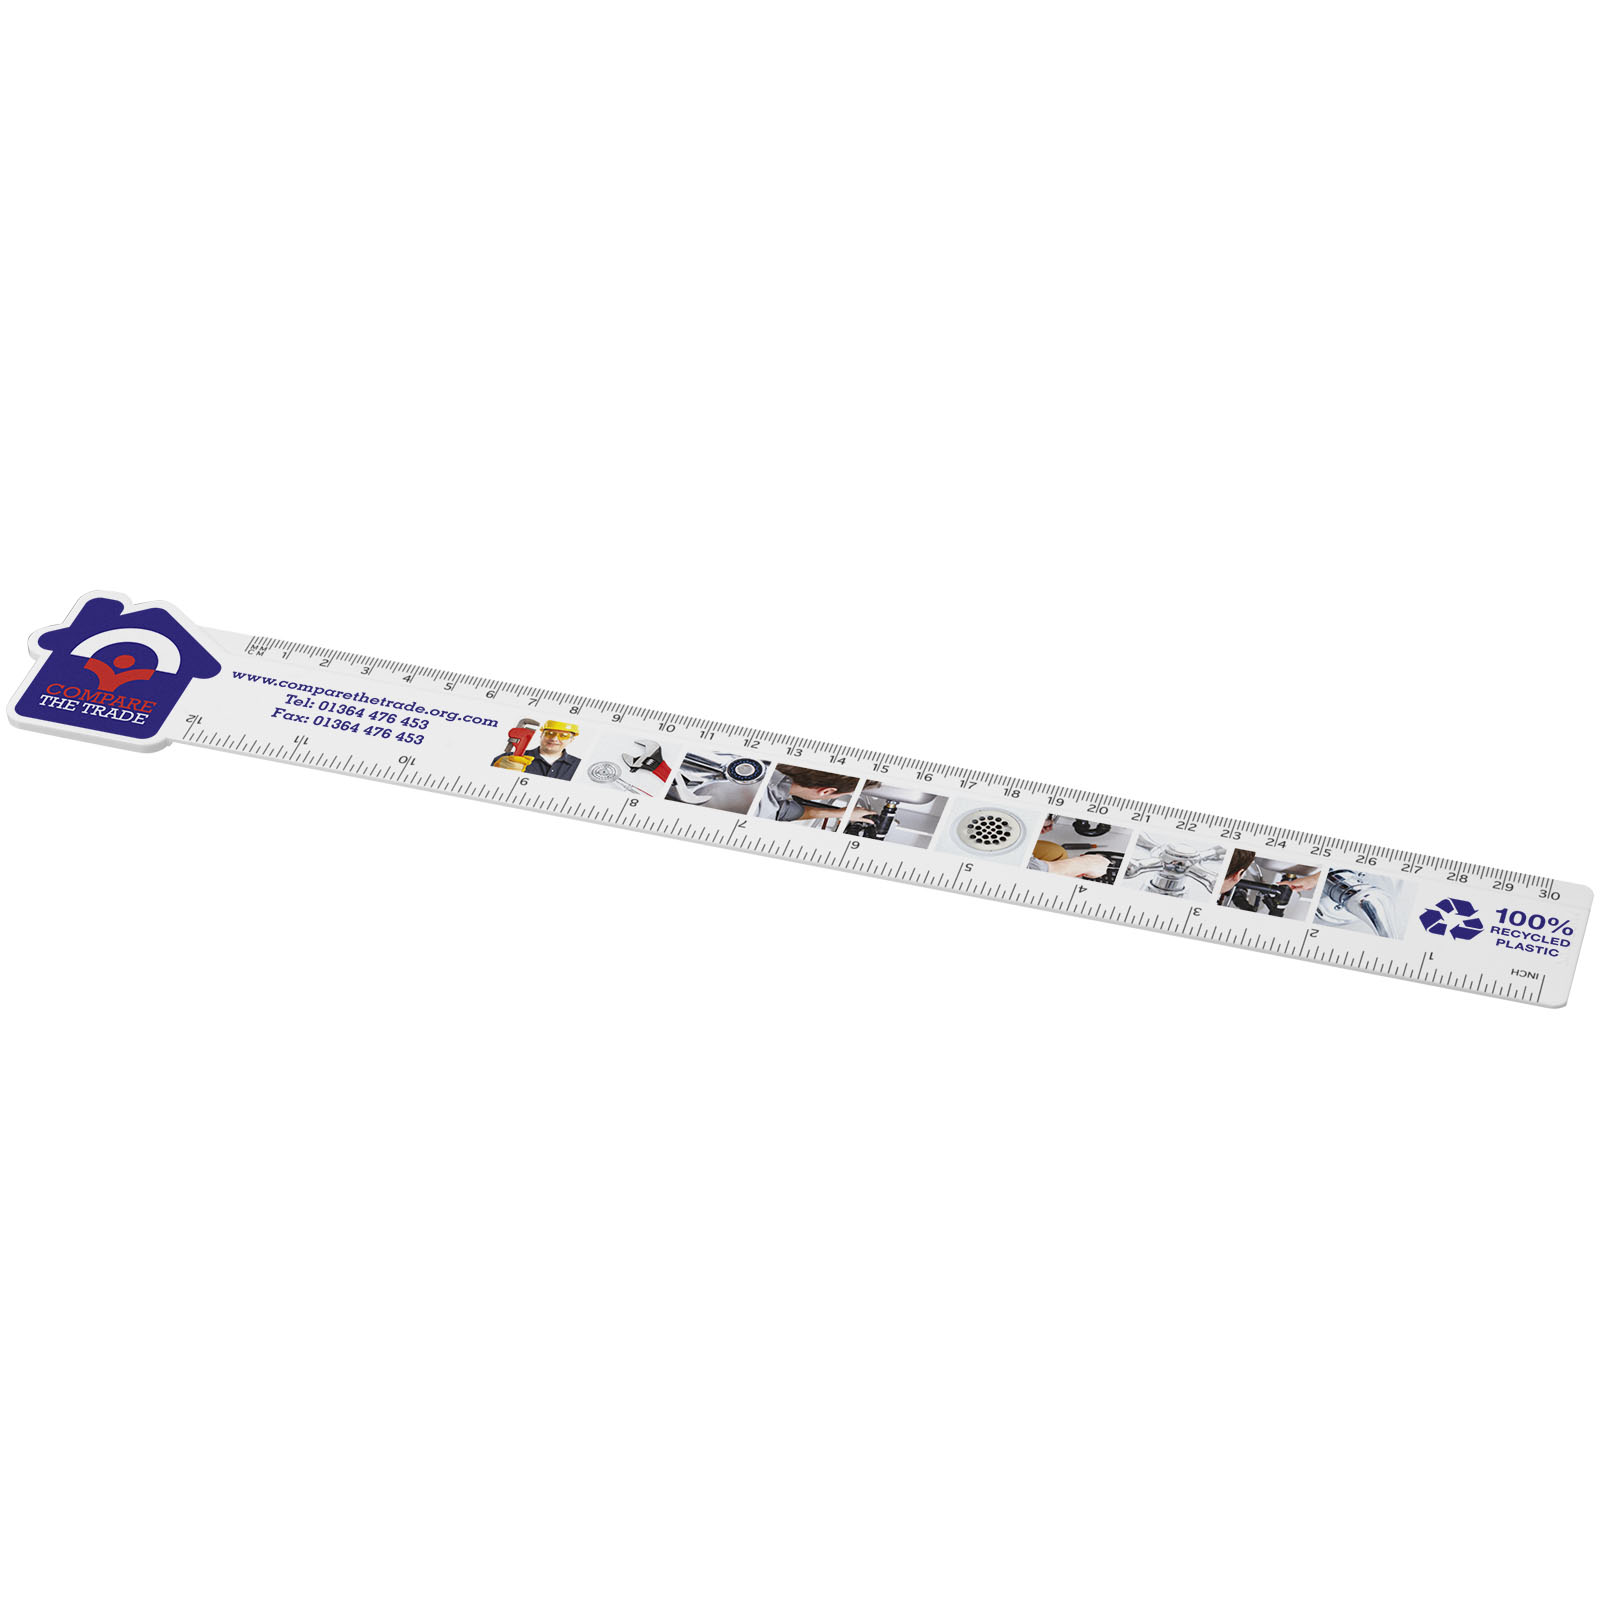 Advertising Desk Accessories - Tait 30cm house-shaped recycled plastic ruler